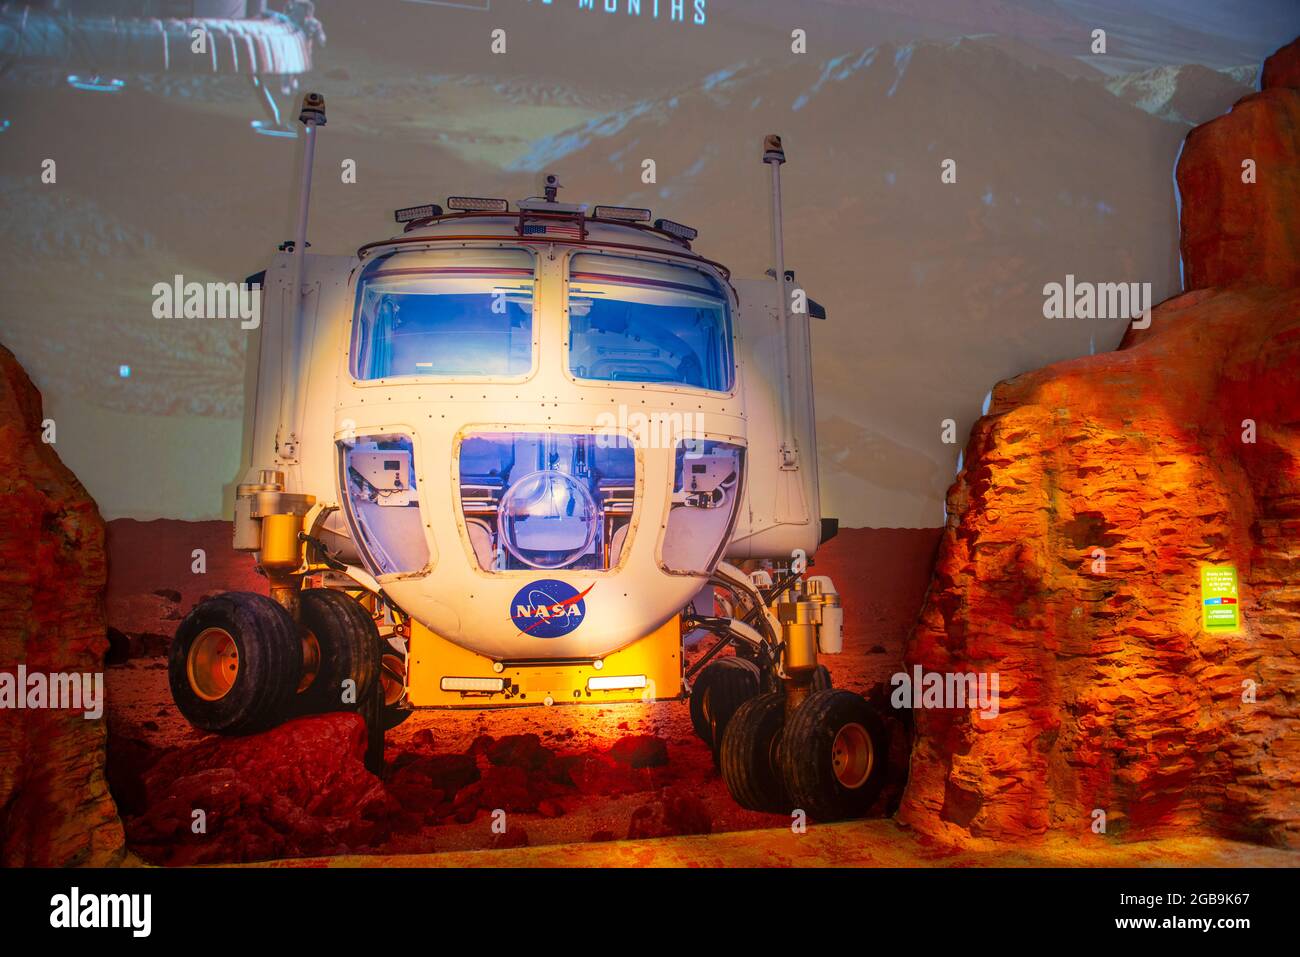 Crewed Mars Rover model in Johnson Space Center in city of Houston, Texas TX, USA. Stock Photo